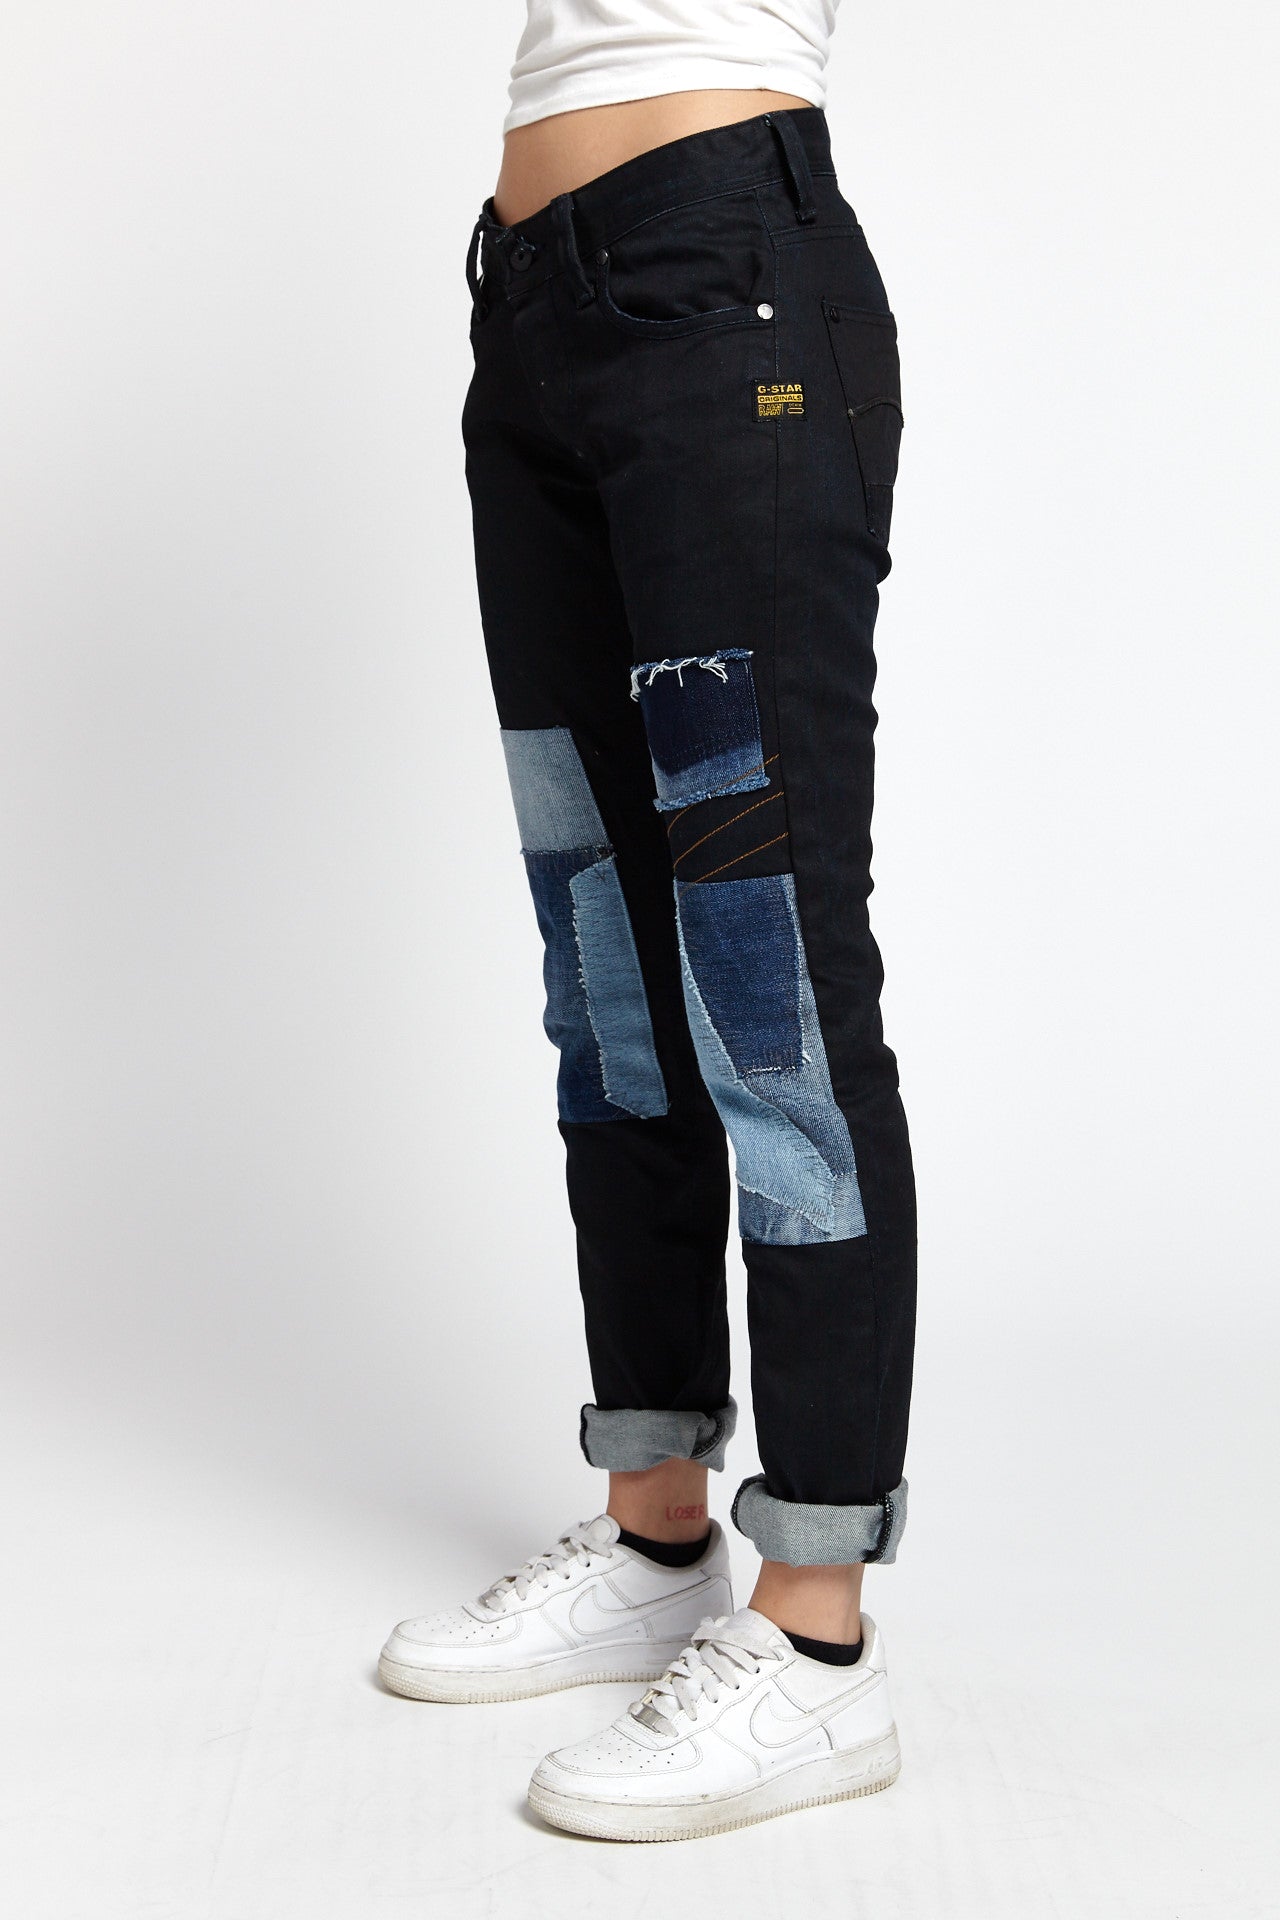 G-STAR RAW RECONSTRUCTED PATCHWORK COTTON JEANS IN BLACK W) -